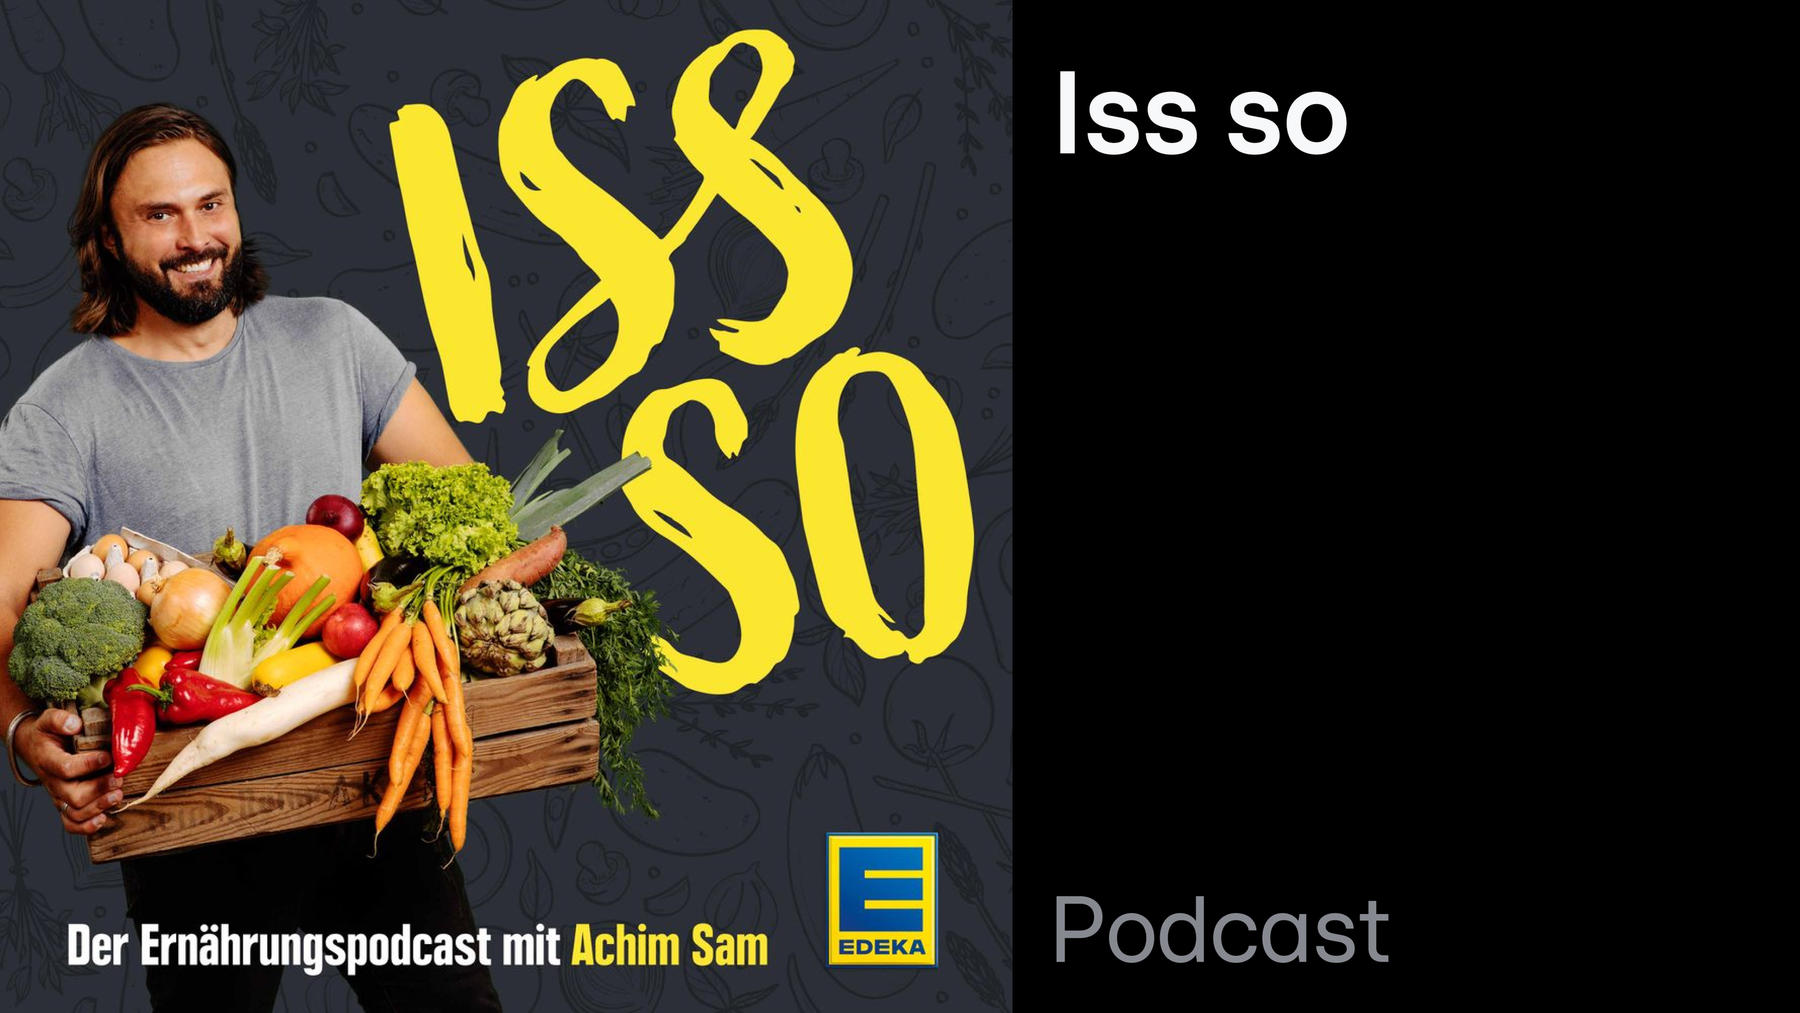 Podcast: Iss so